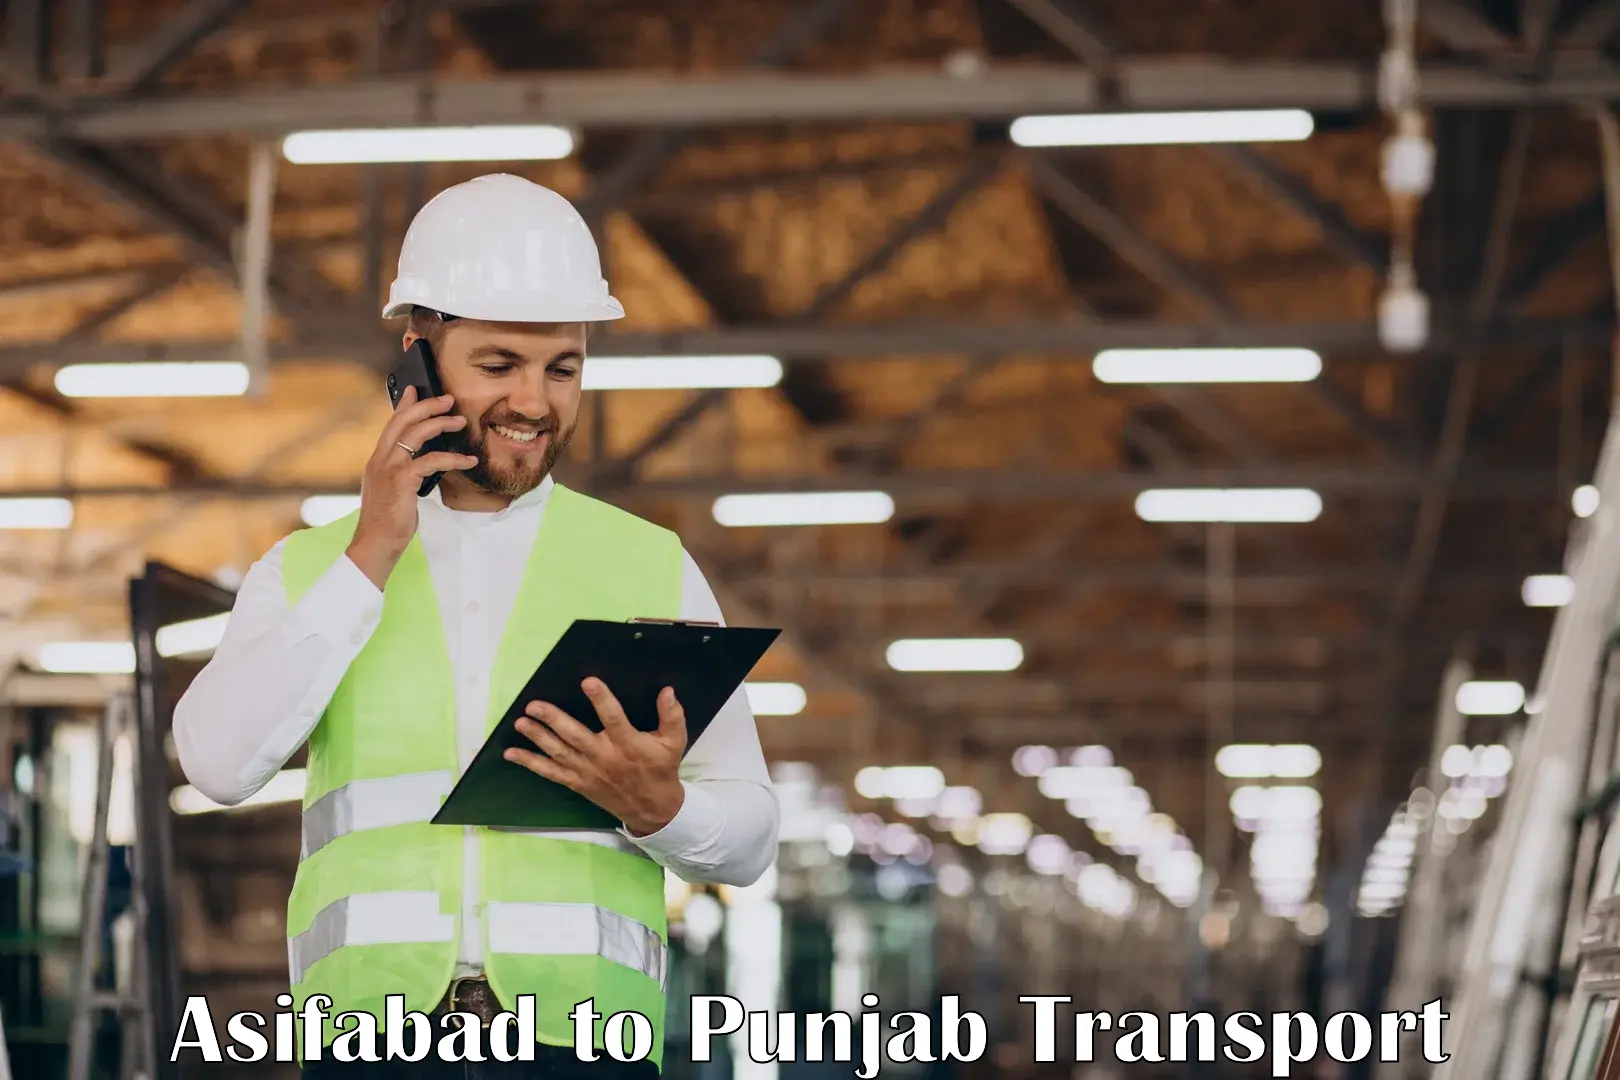 Online transport service Asifabad to Raikot